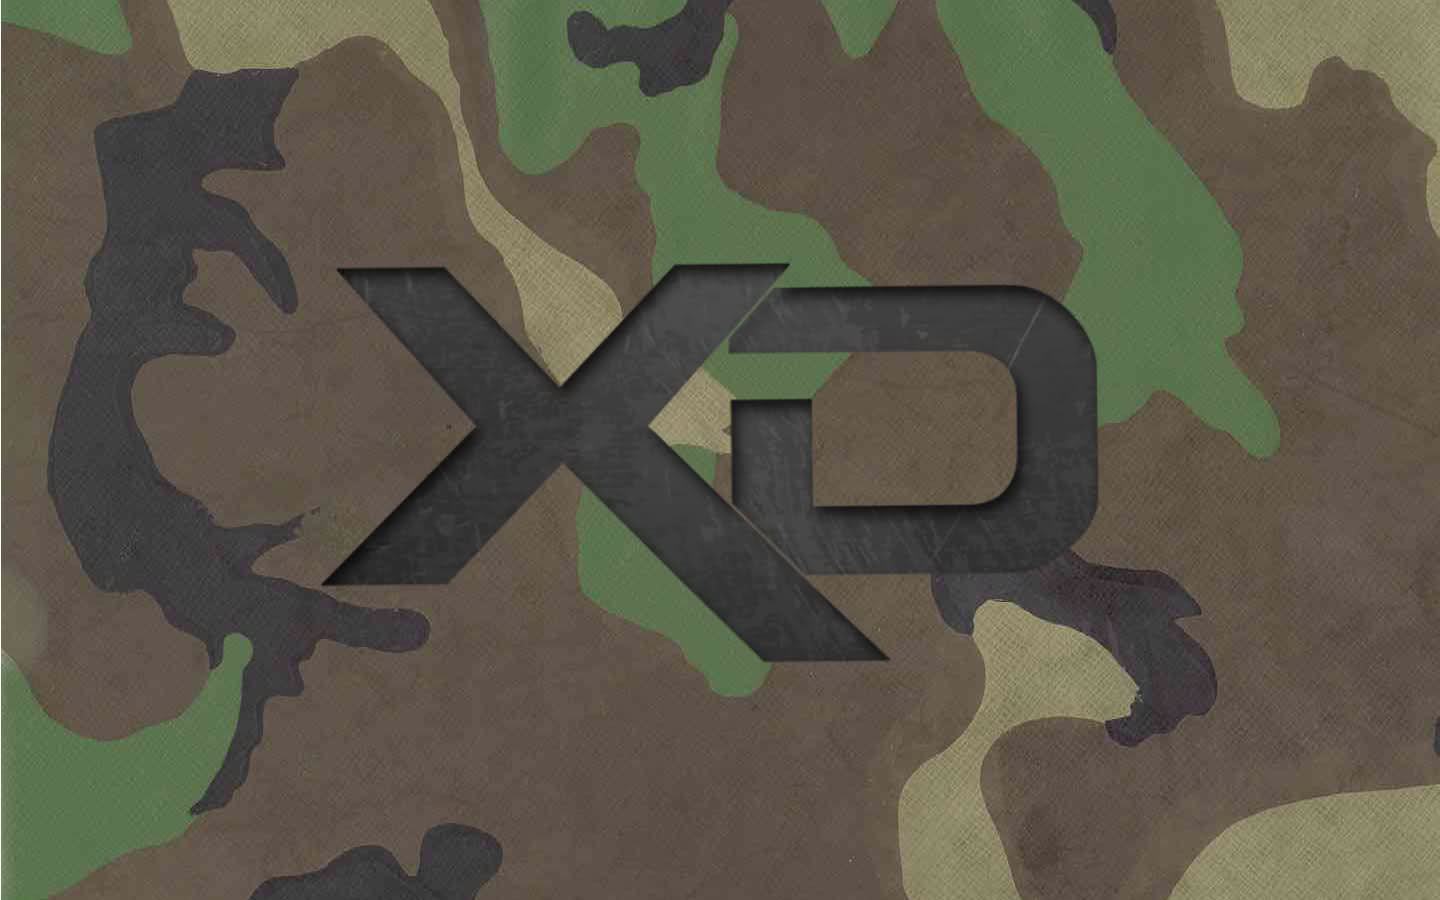 Made an XD Wallpaper: COME GET IT!! | Page 5 | Springfield XD Forum